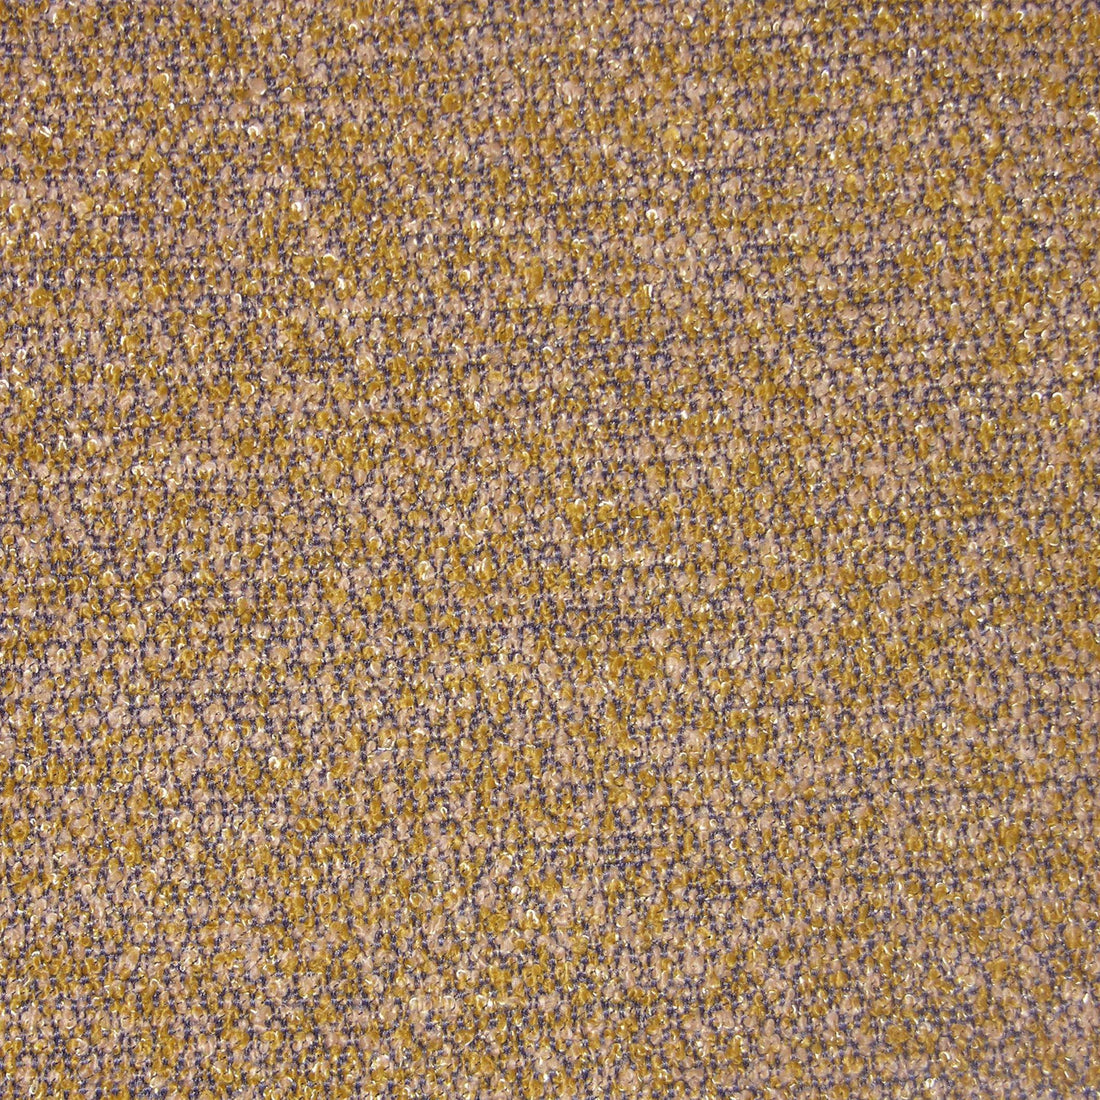 Elkin fabric in gold color - pattern number VC 0088OK10 - by Scalamandre in the Old World Weavers collection